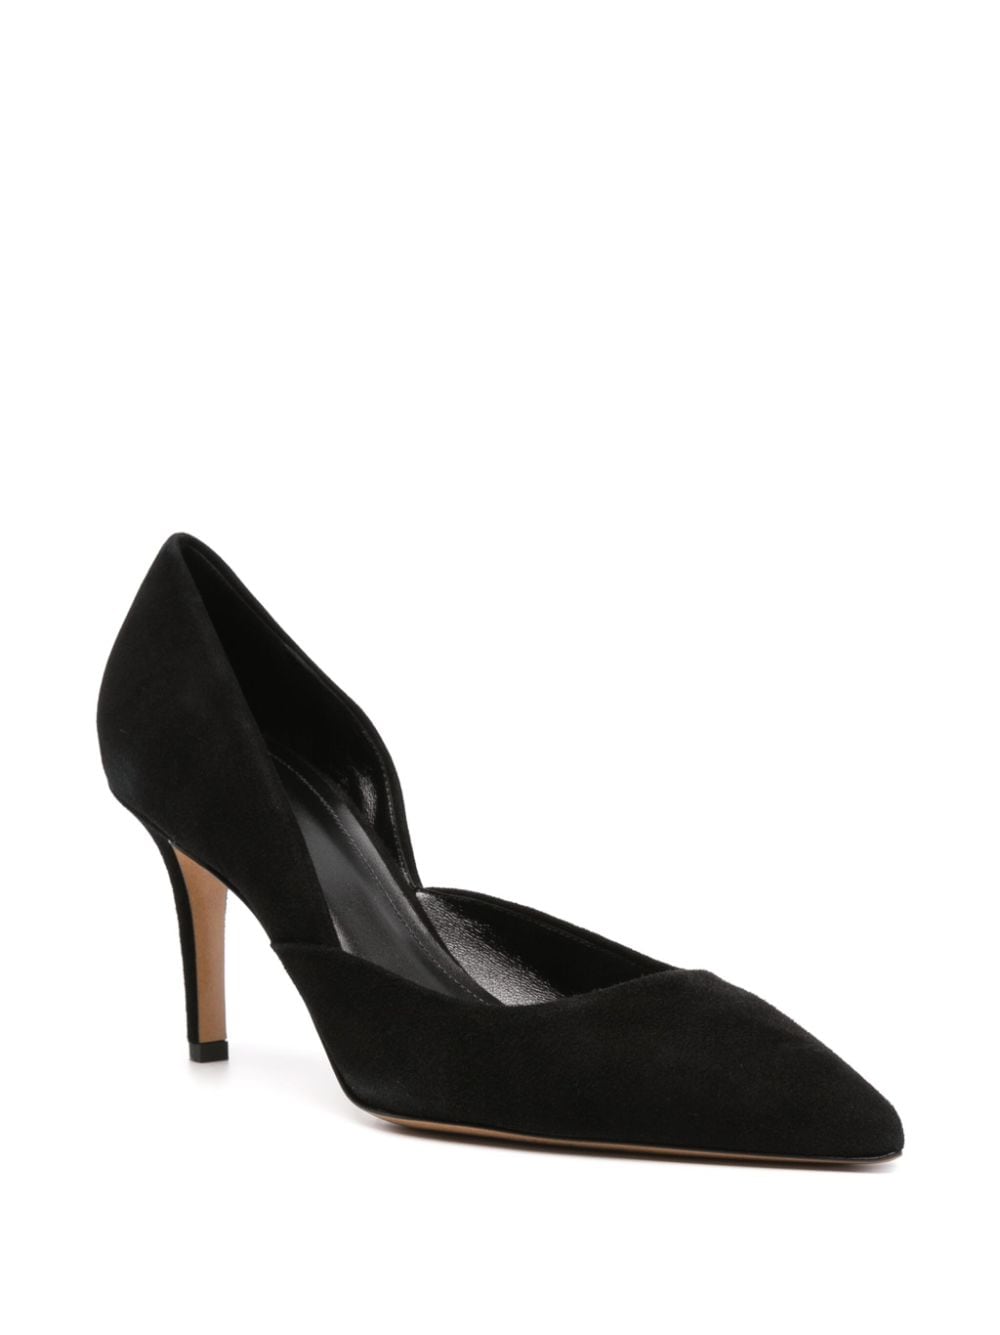 Image 2 of ISABEL MARANT Purcy 85mm suede pumps